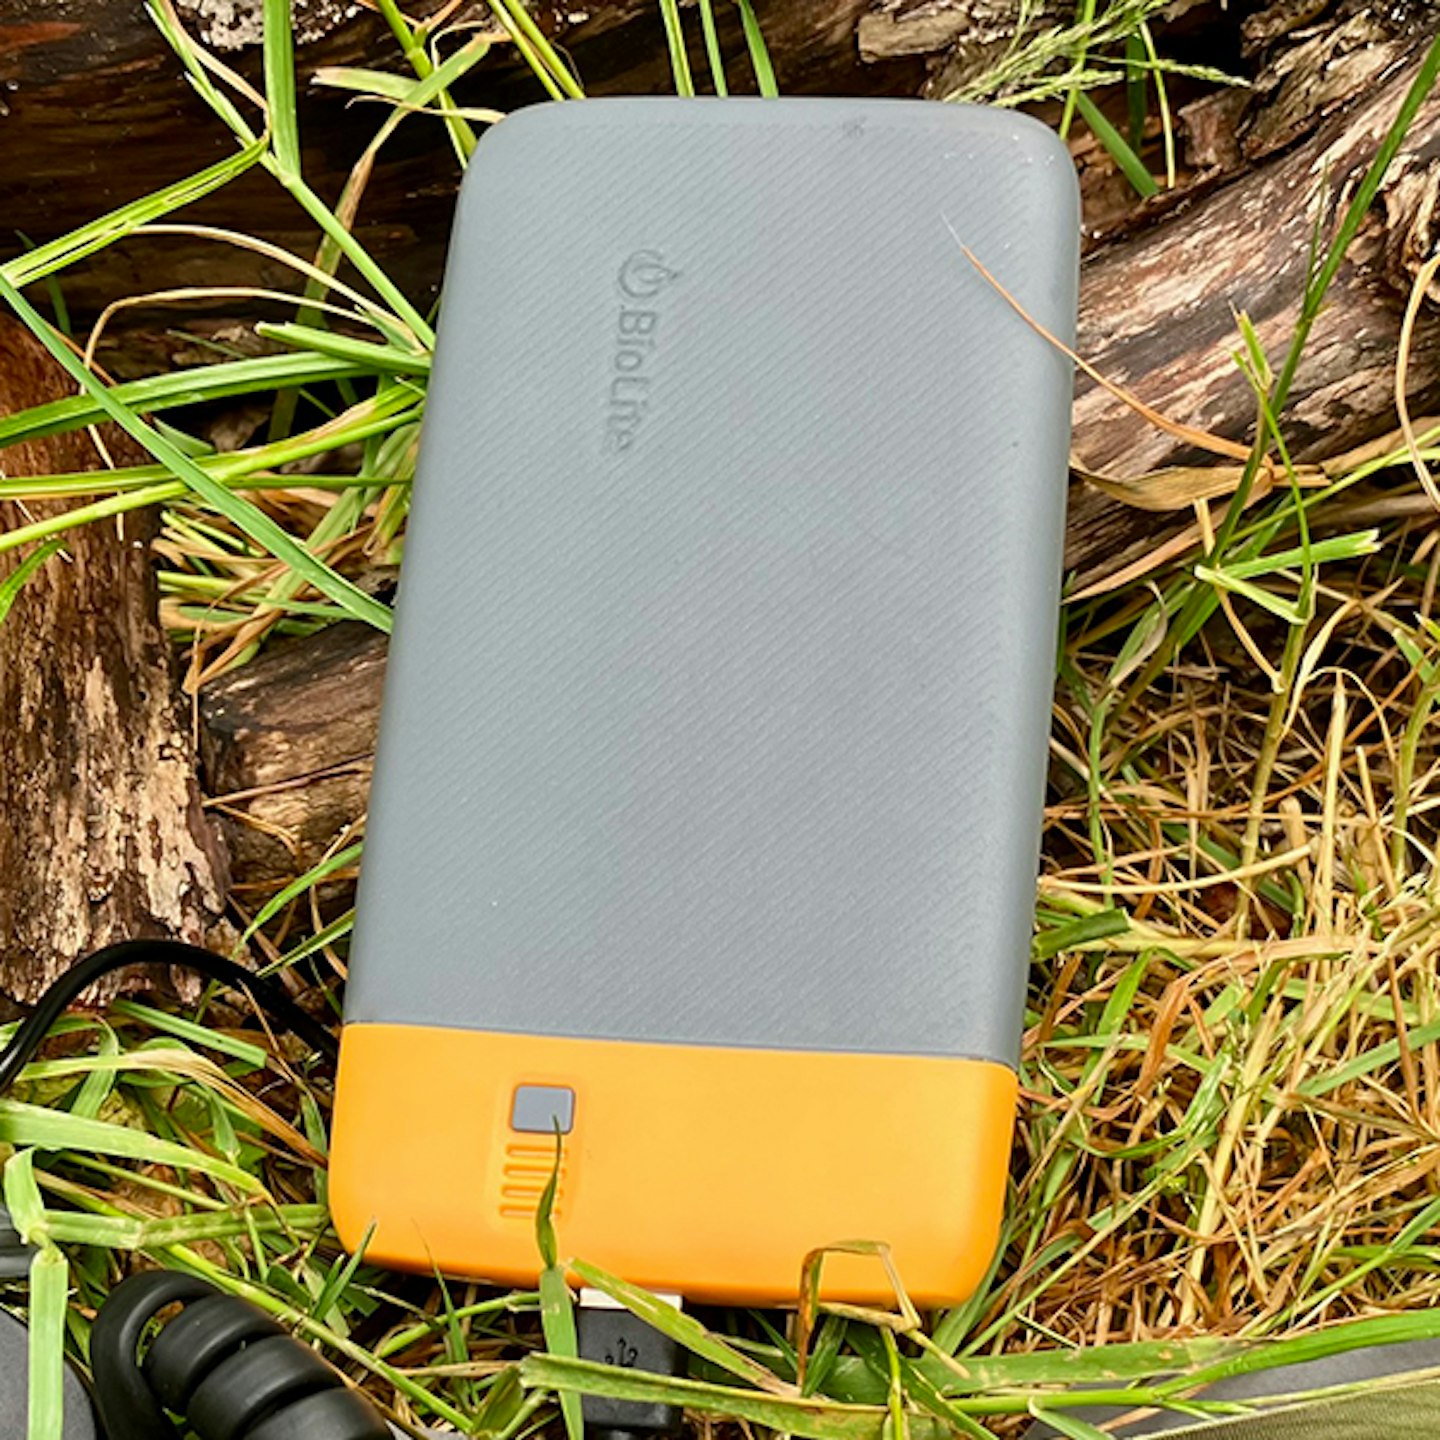 Biolite Charge 40 PD best small powerbank